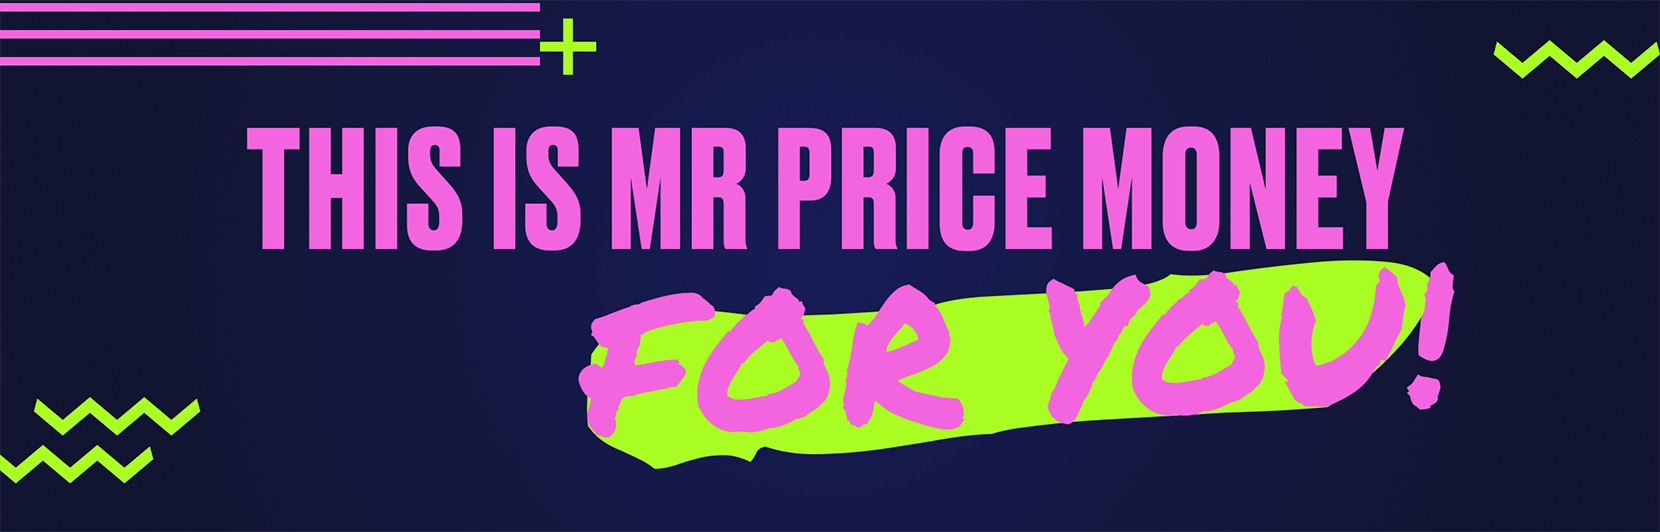 This is Mr Price Money For You